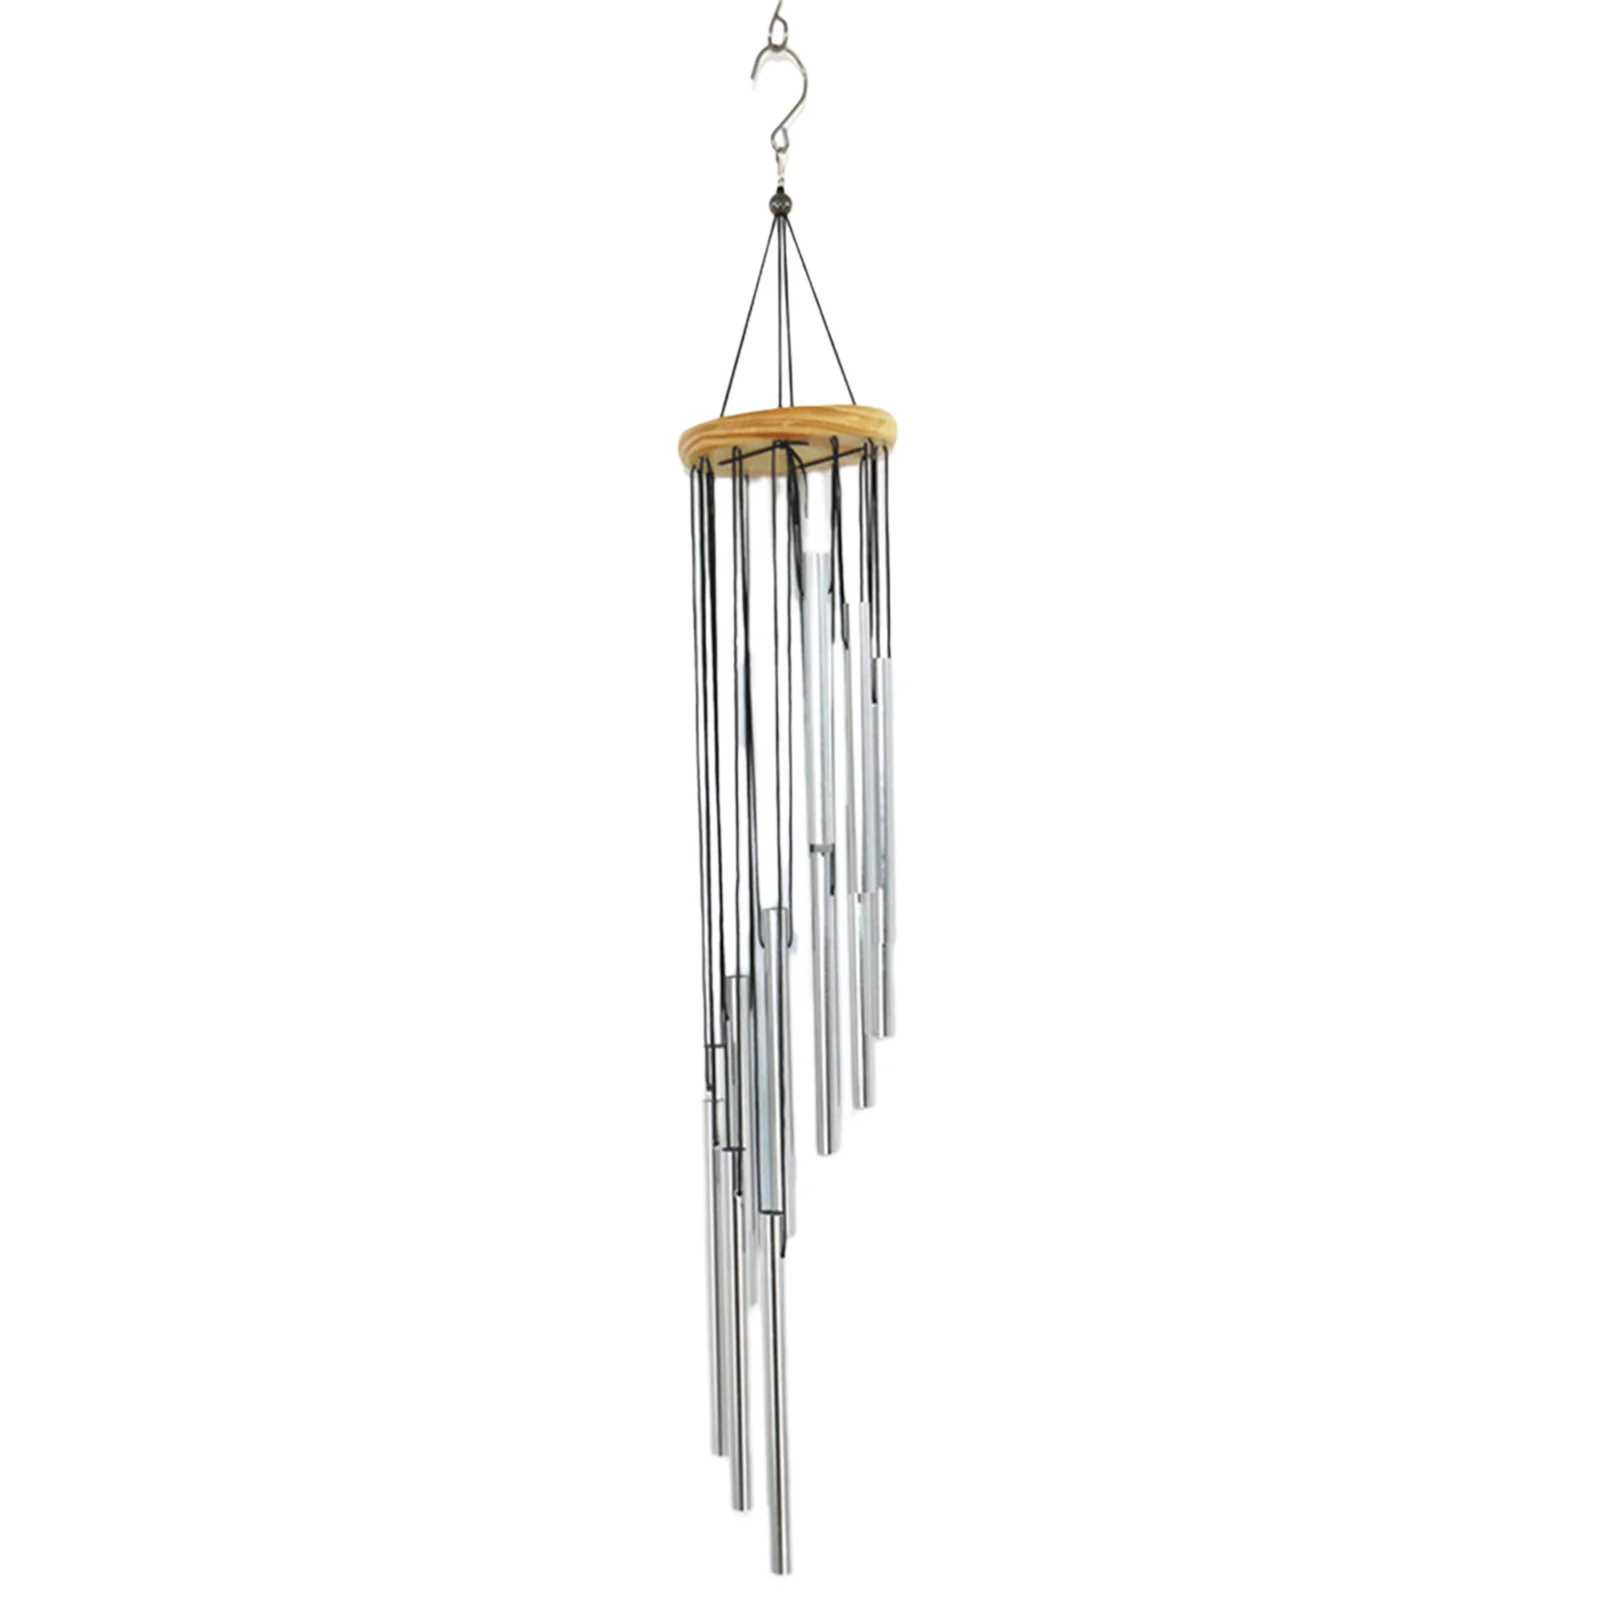 

12 Tubes Wind Chimes Aluminum Tube Pine Metal Pipe Wind Chimes Bells Balcony Outdoor Yard Garden Wall Hanging Decorations